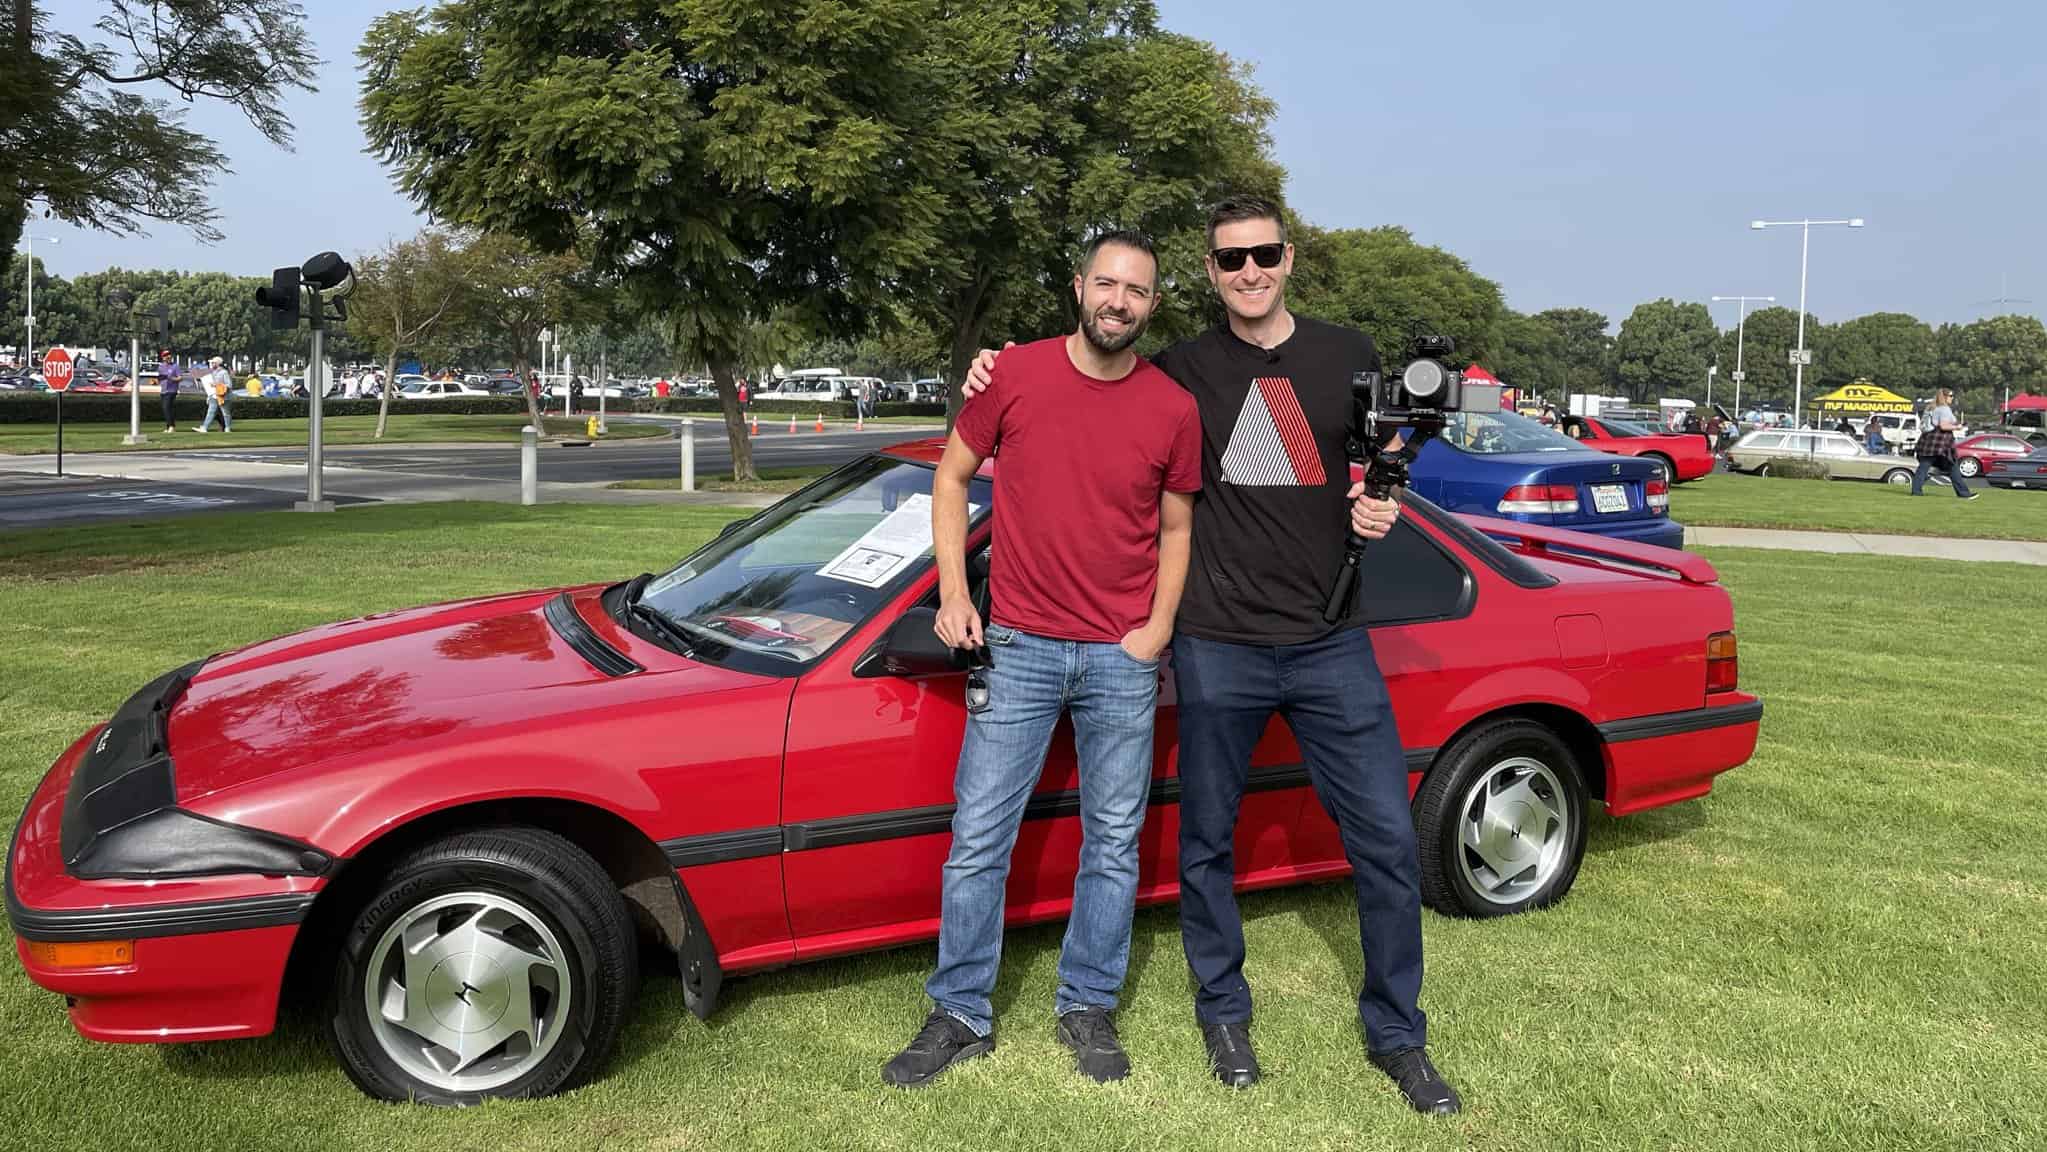 RADwood show takes us back to the 1980s and ‘90s